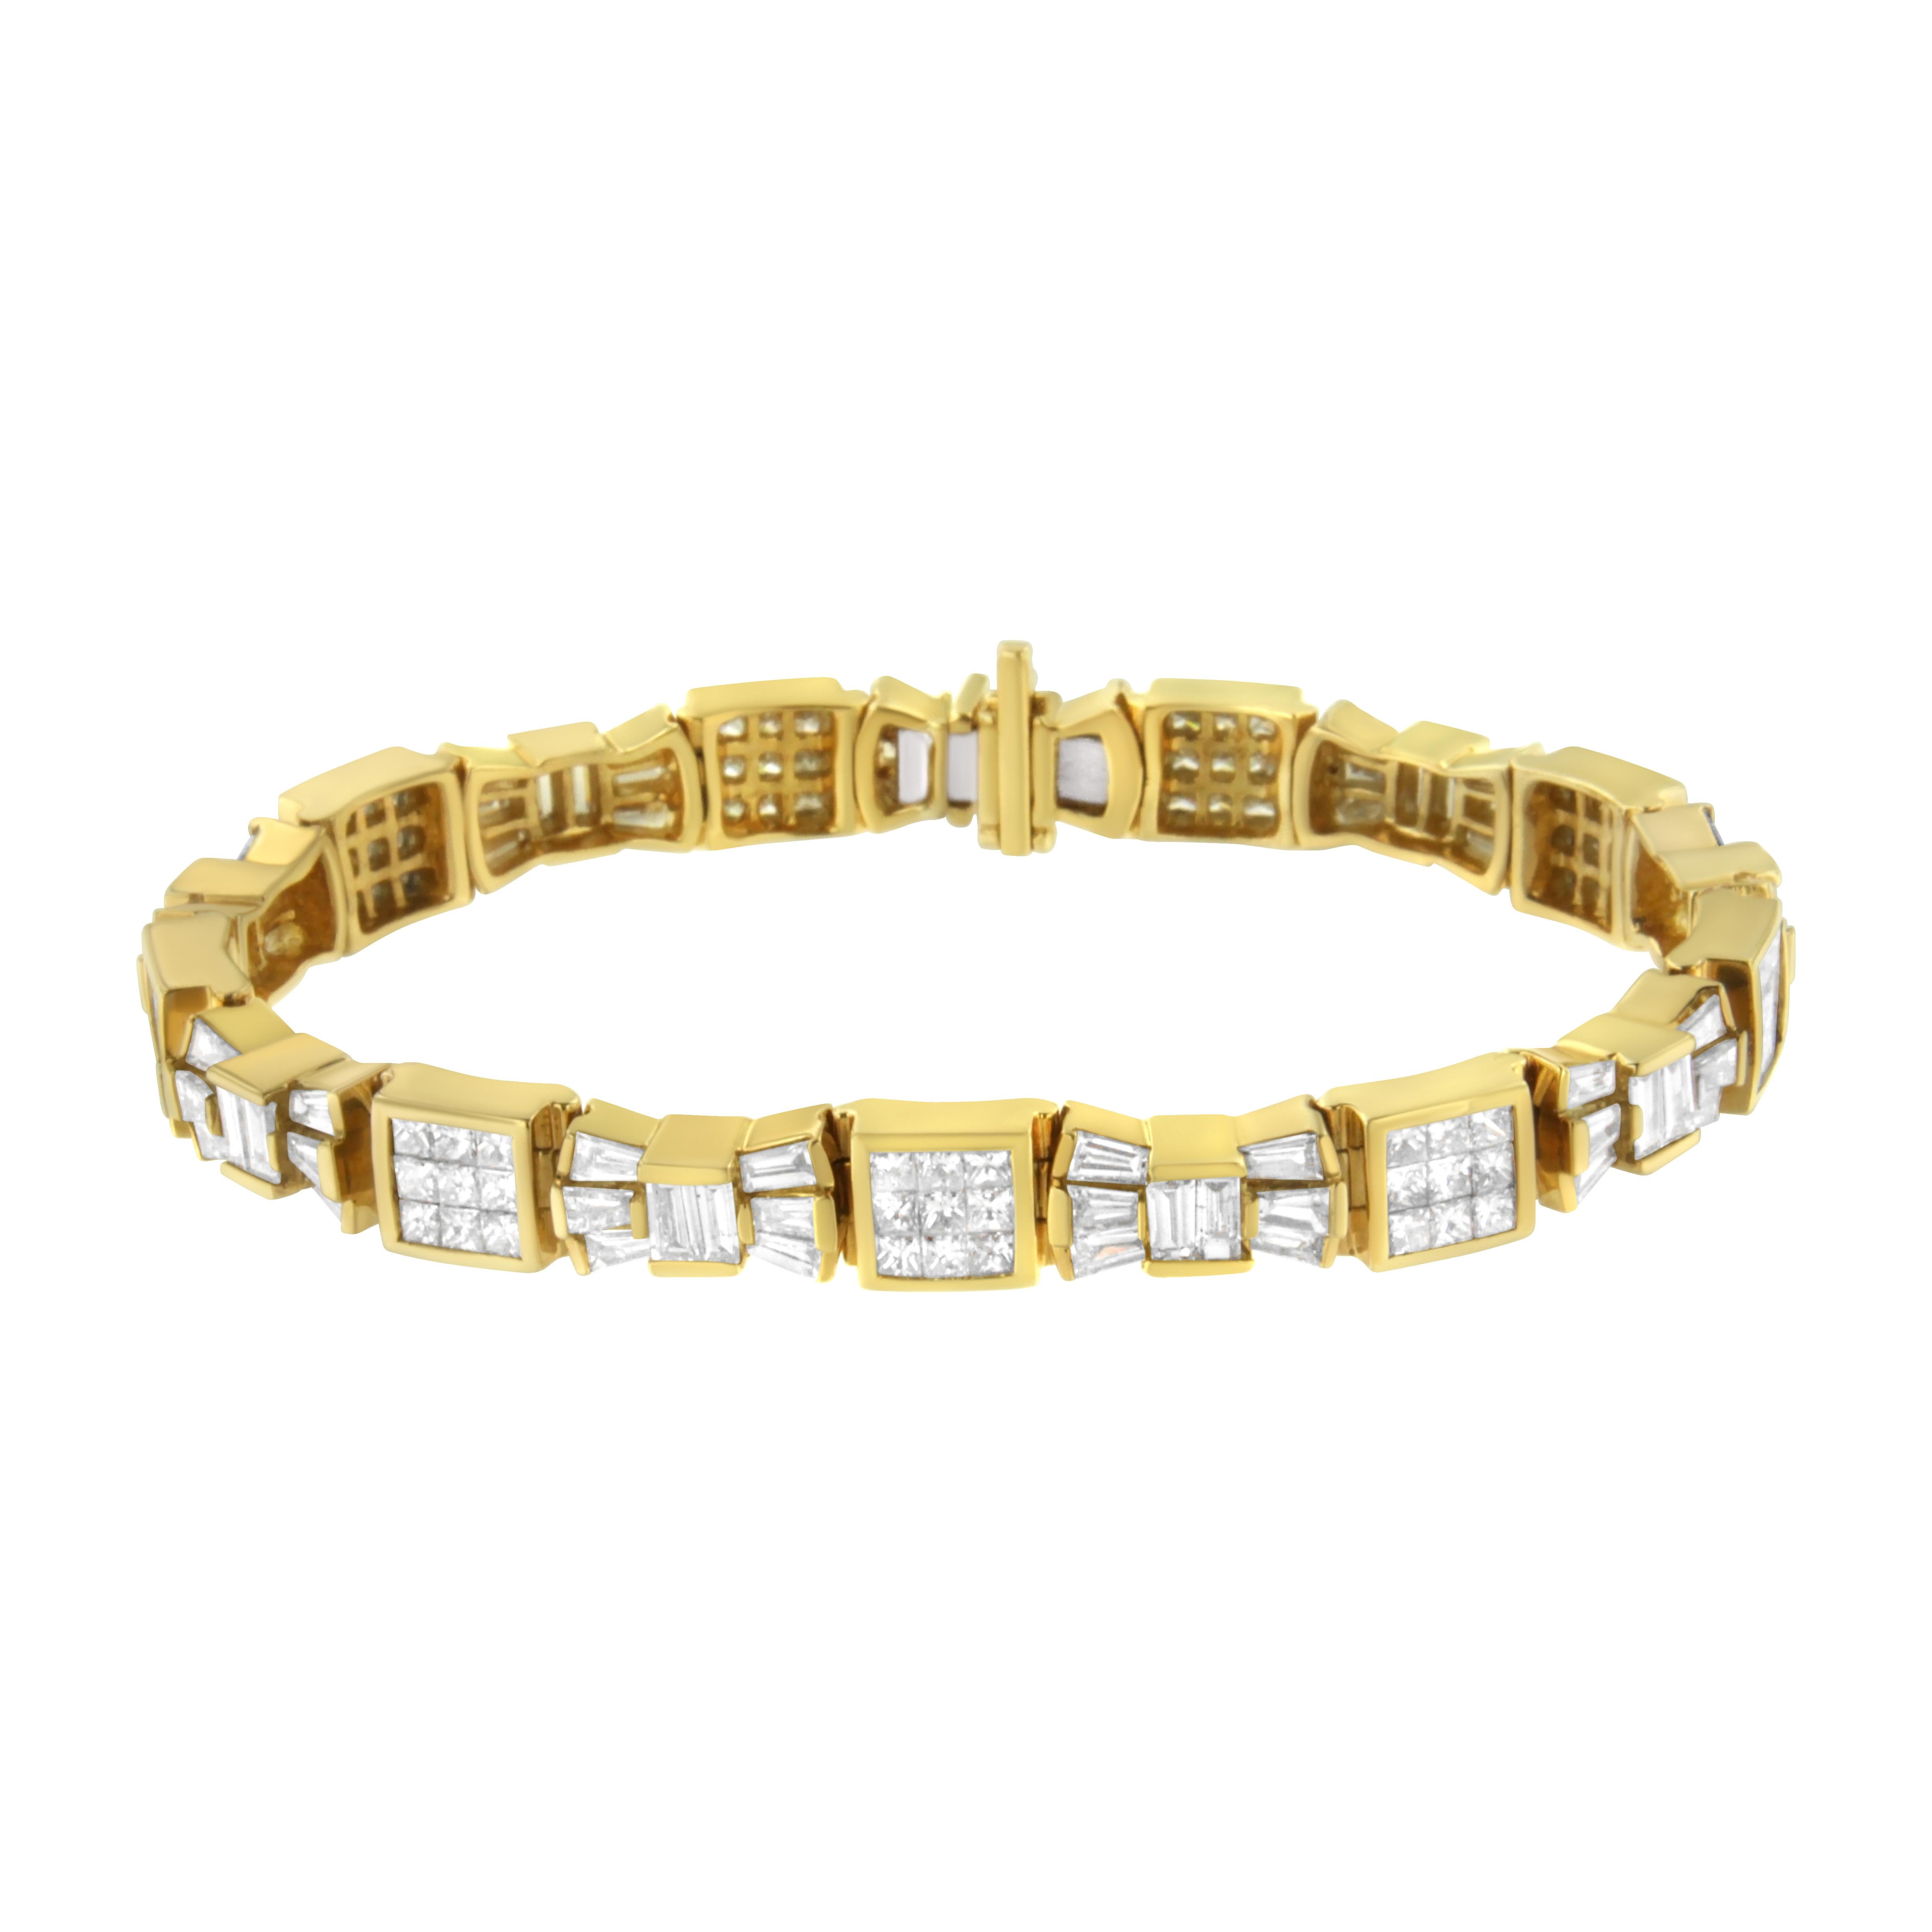 This charming, contemporary bracelet in 14 karat yellow gold flaunts 9 carats of princess and baguette cut diamonds, which are sprinkled across the connecting bow and cube links for a chic look that goes from day to night in style. 

